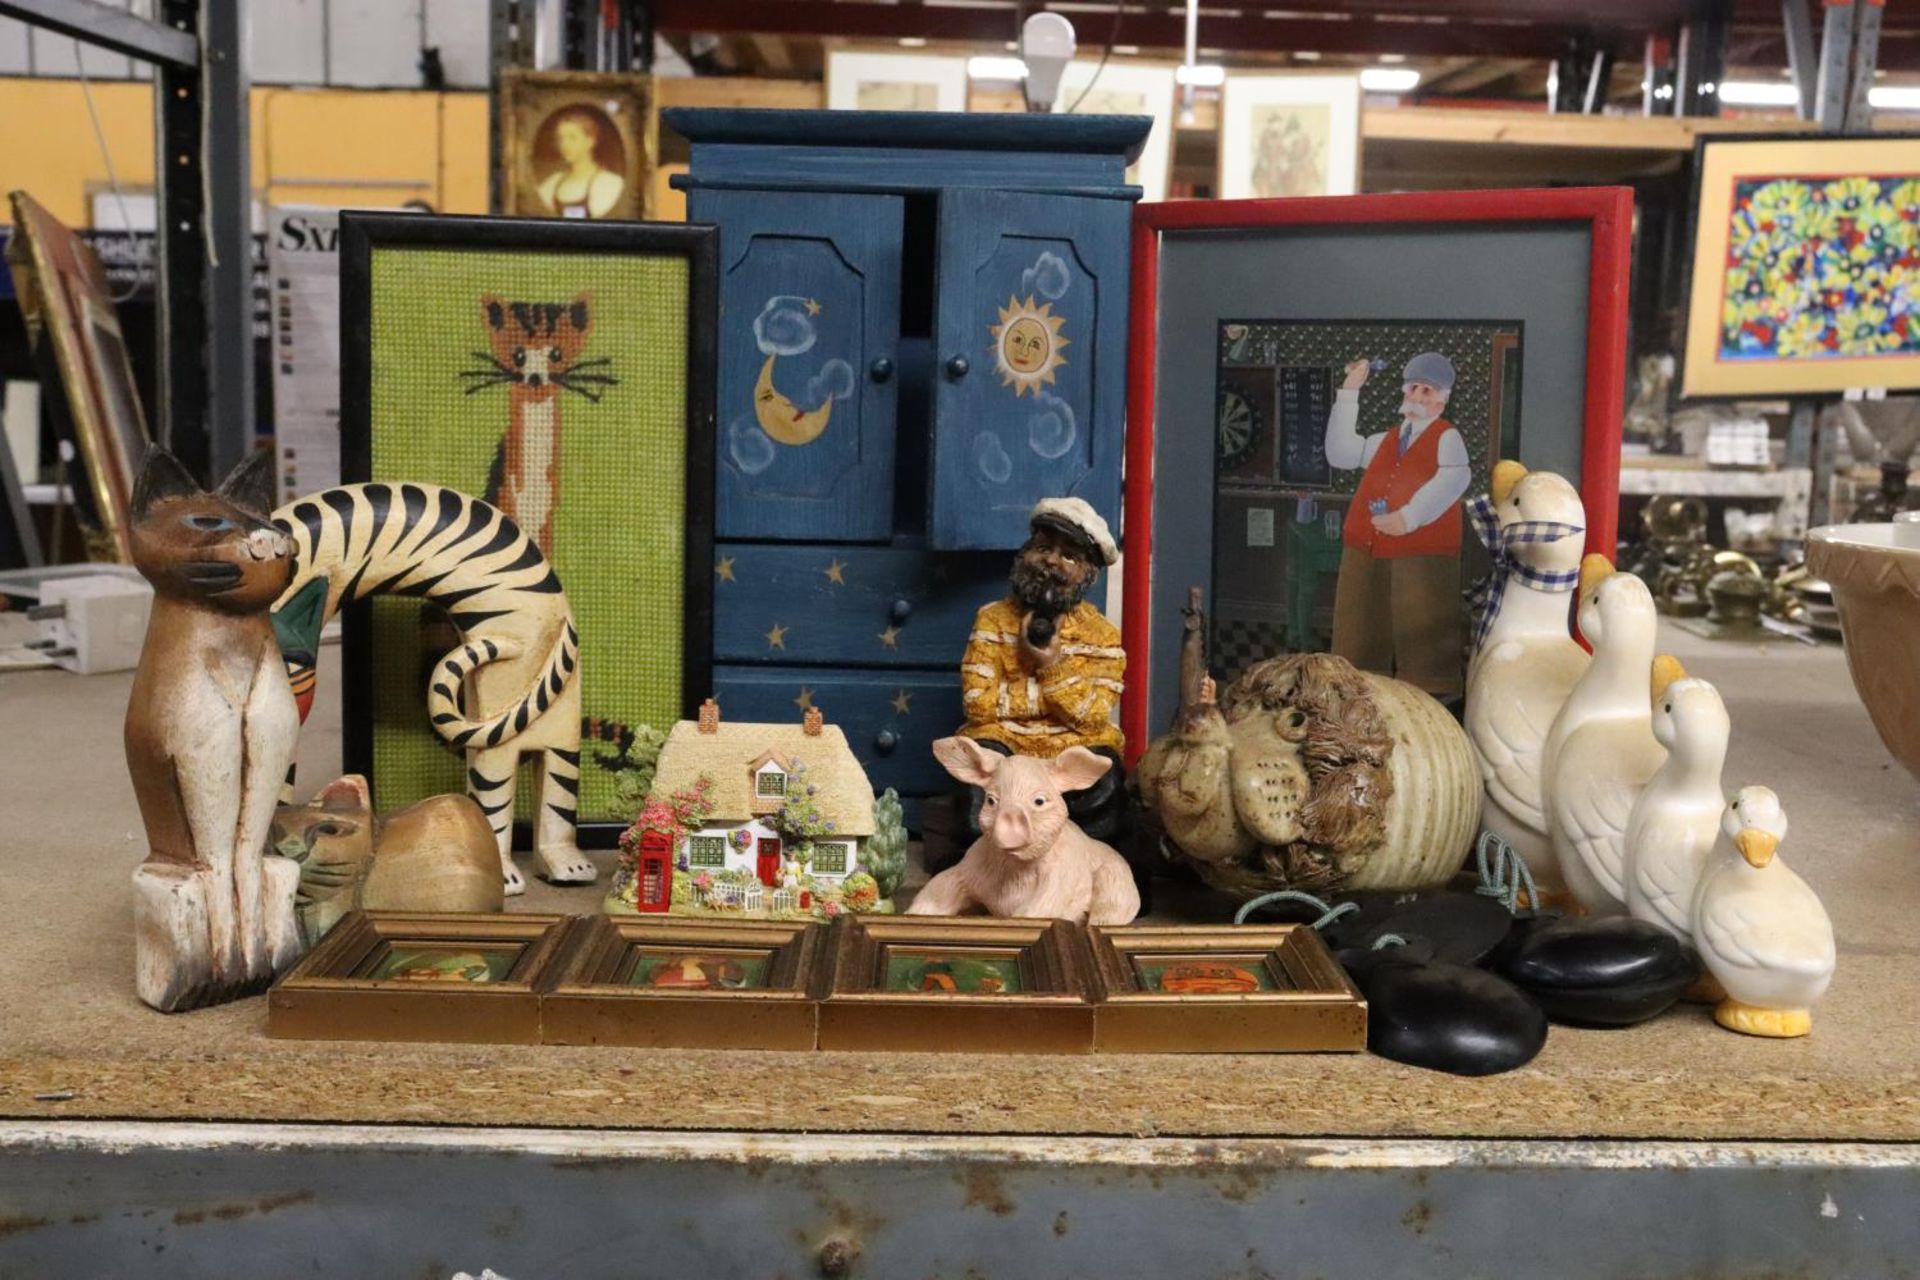 AMIXED LOT TO INCLUDE A MINIATURE WOODEN CUPBOARD AND DRAWERS, CAT ORNAMENTS, FOUR MINIATURE CERAMIC